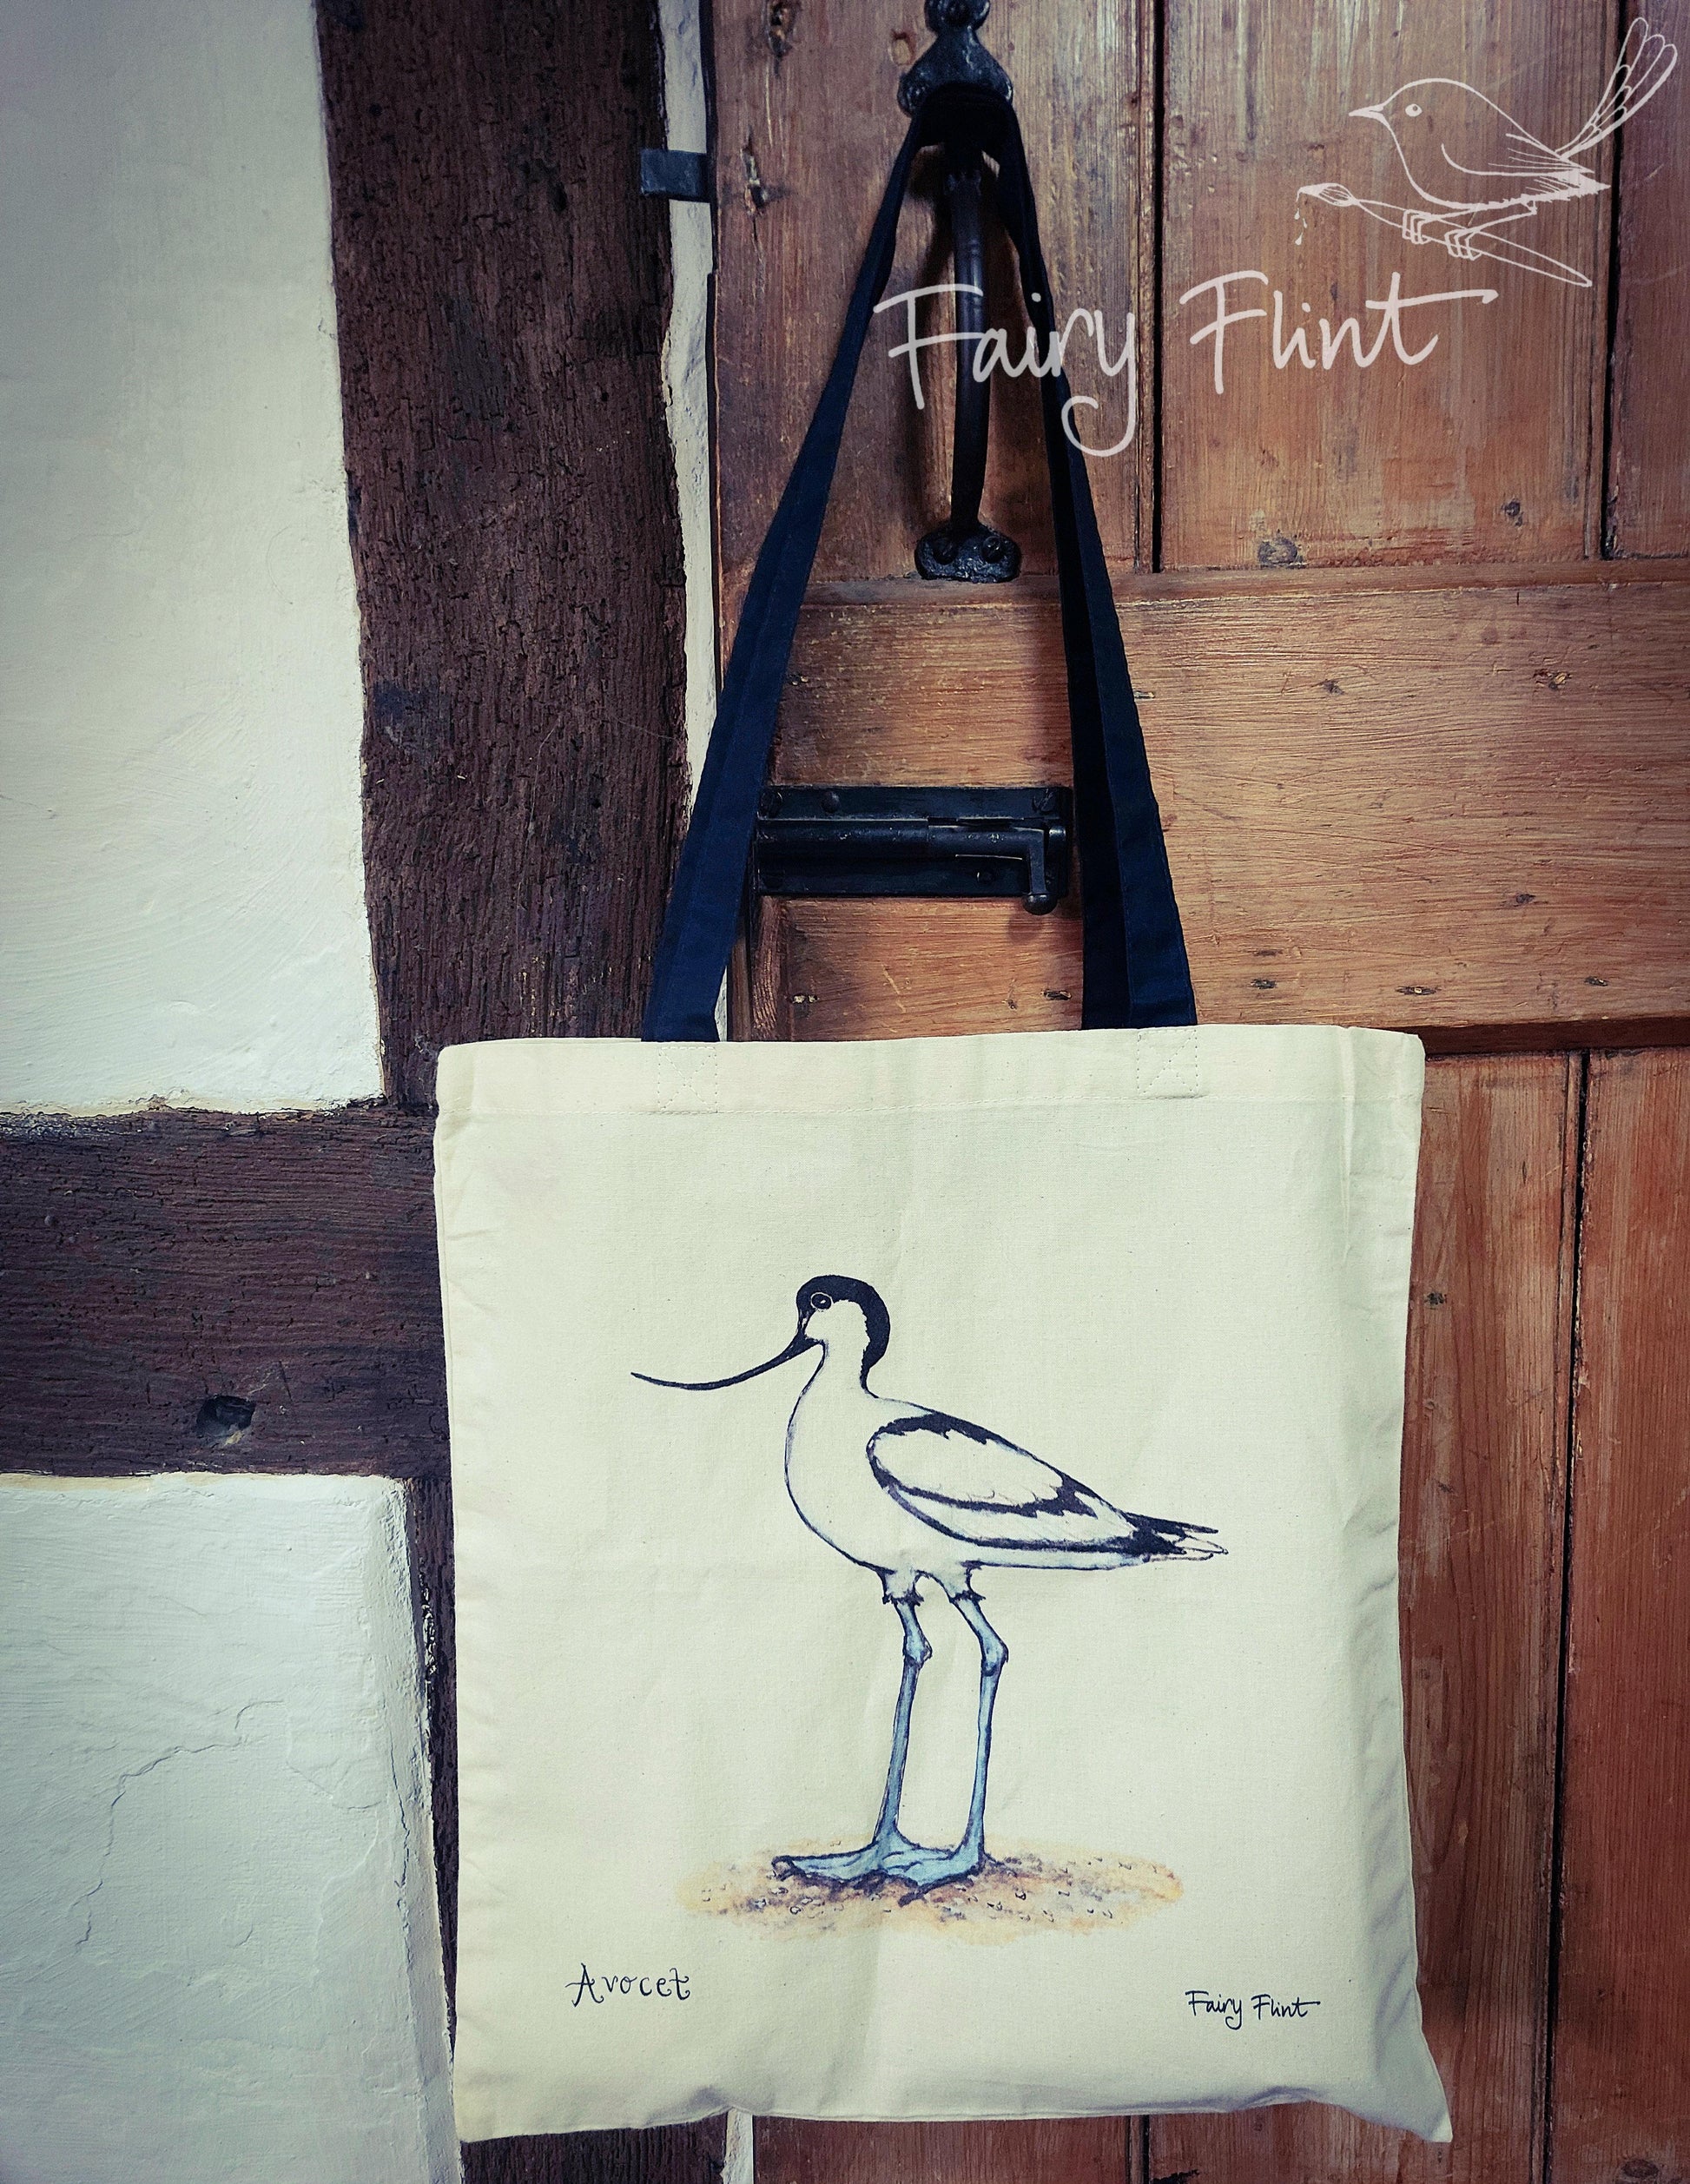 Canvas bag with Avocet painting eco friendly print by Fairy Flint photoshoot in cruck frame 15th century cottage, bag hanging on door latch of wooden door next to wall with oak beams